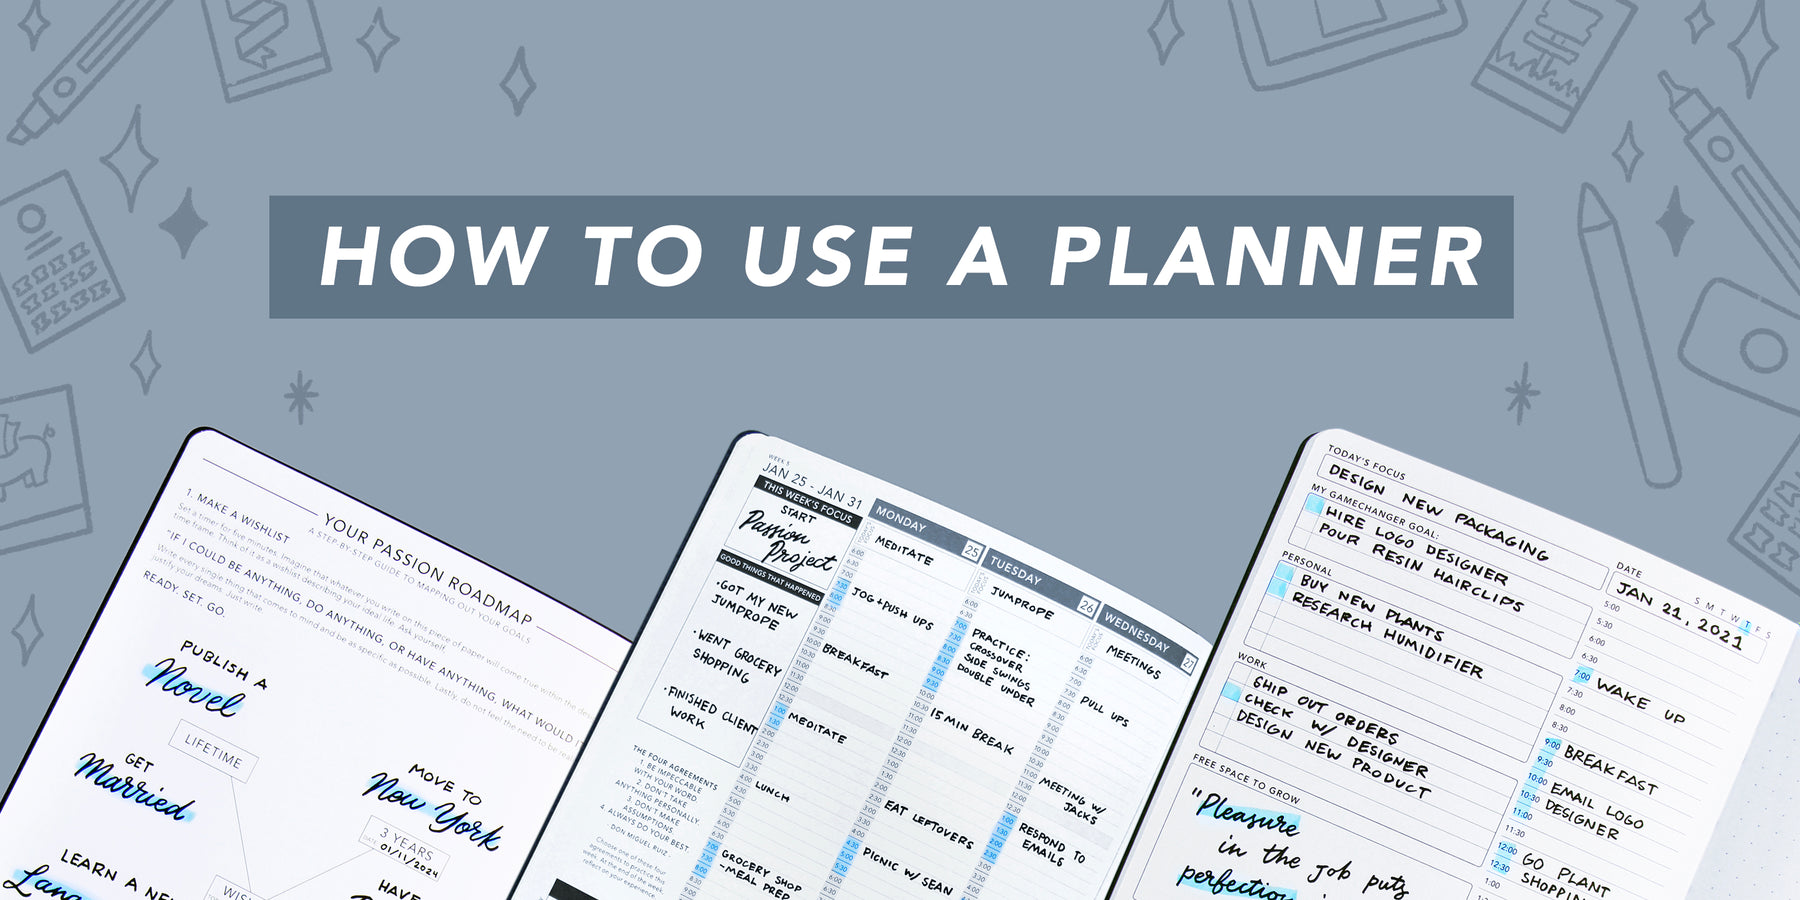 How to Use a Planner: 9 Easy Steps to Making the Most of Your Paper Planner